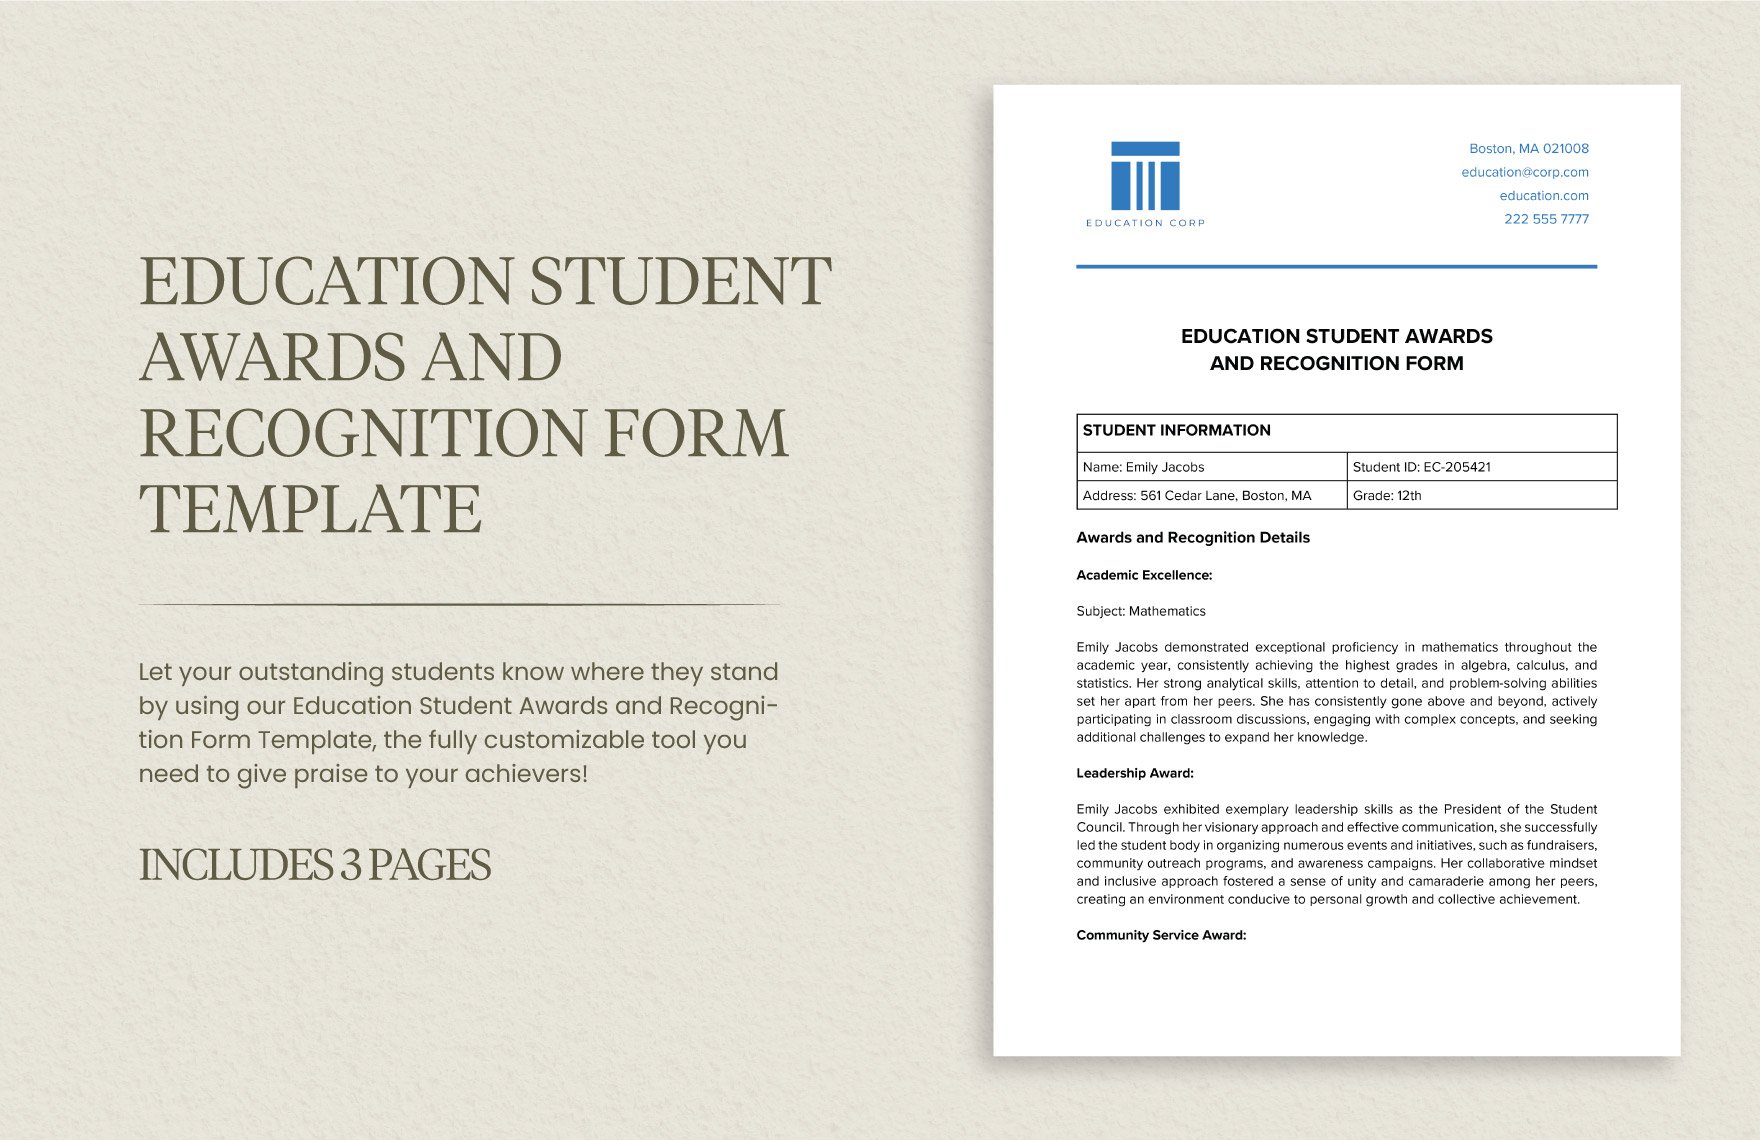 Education Student Awards and Recognition Form Template